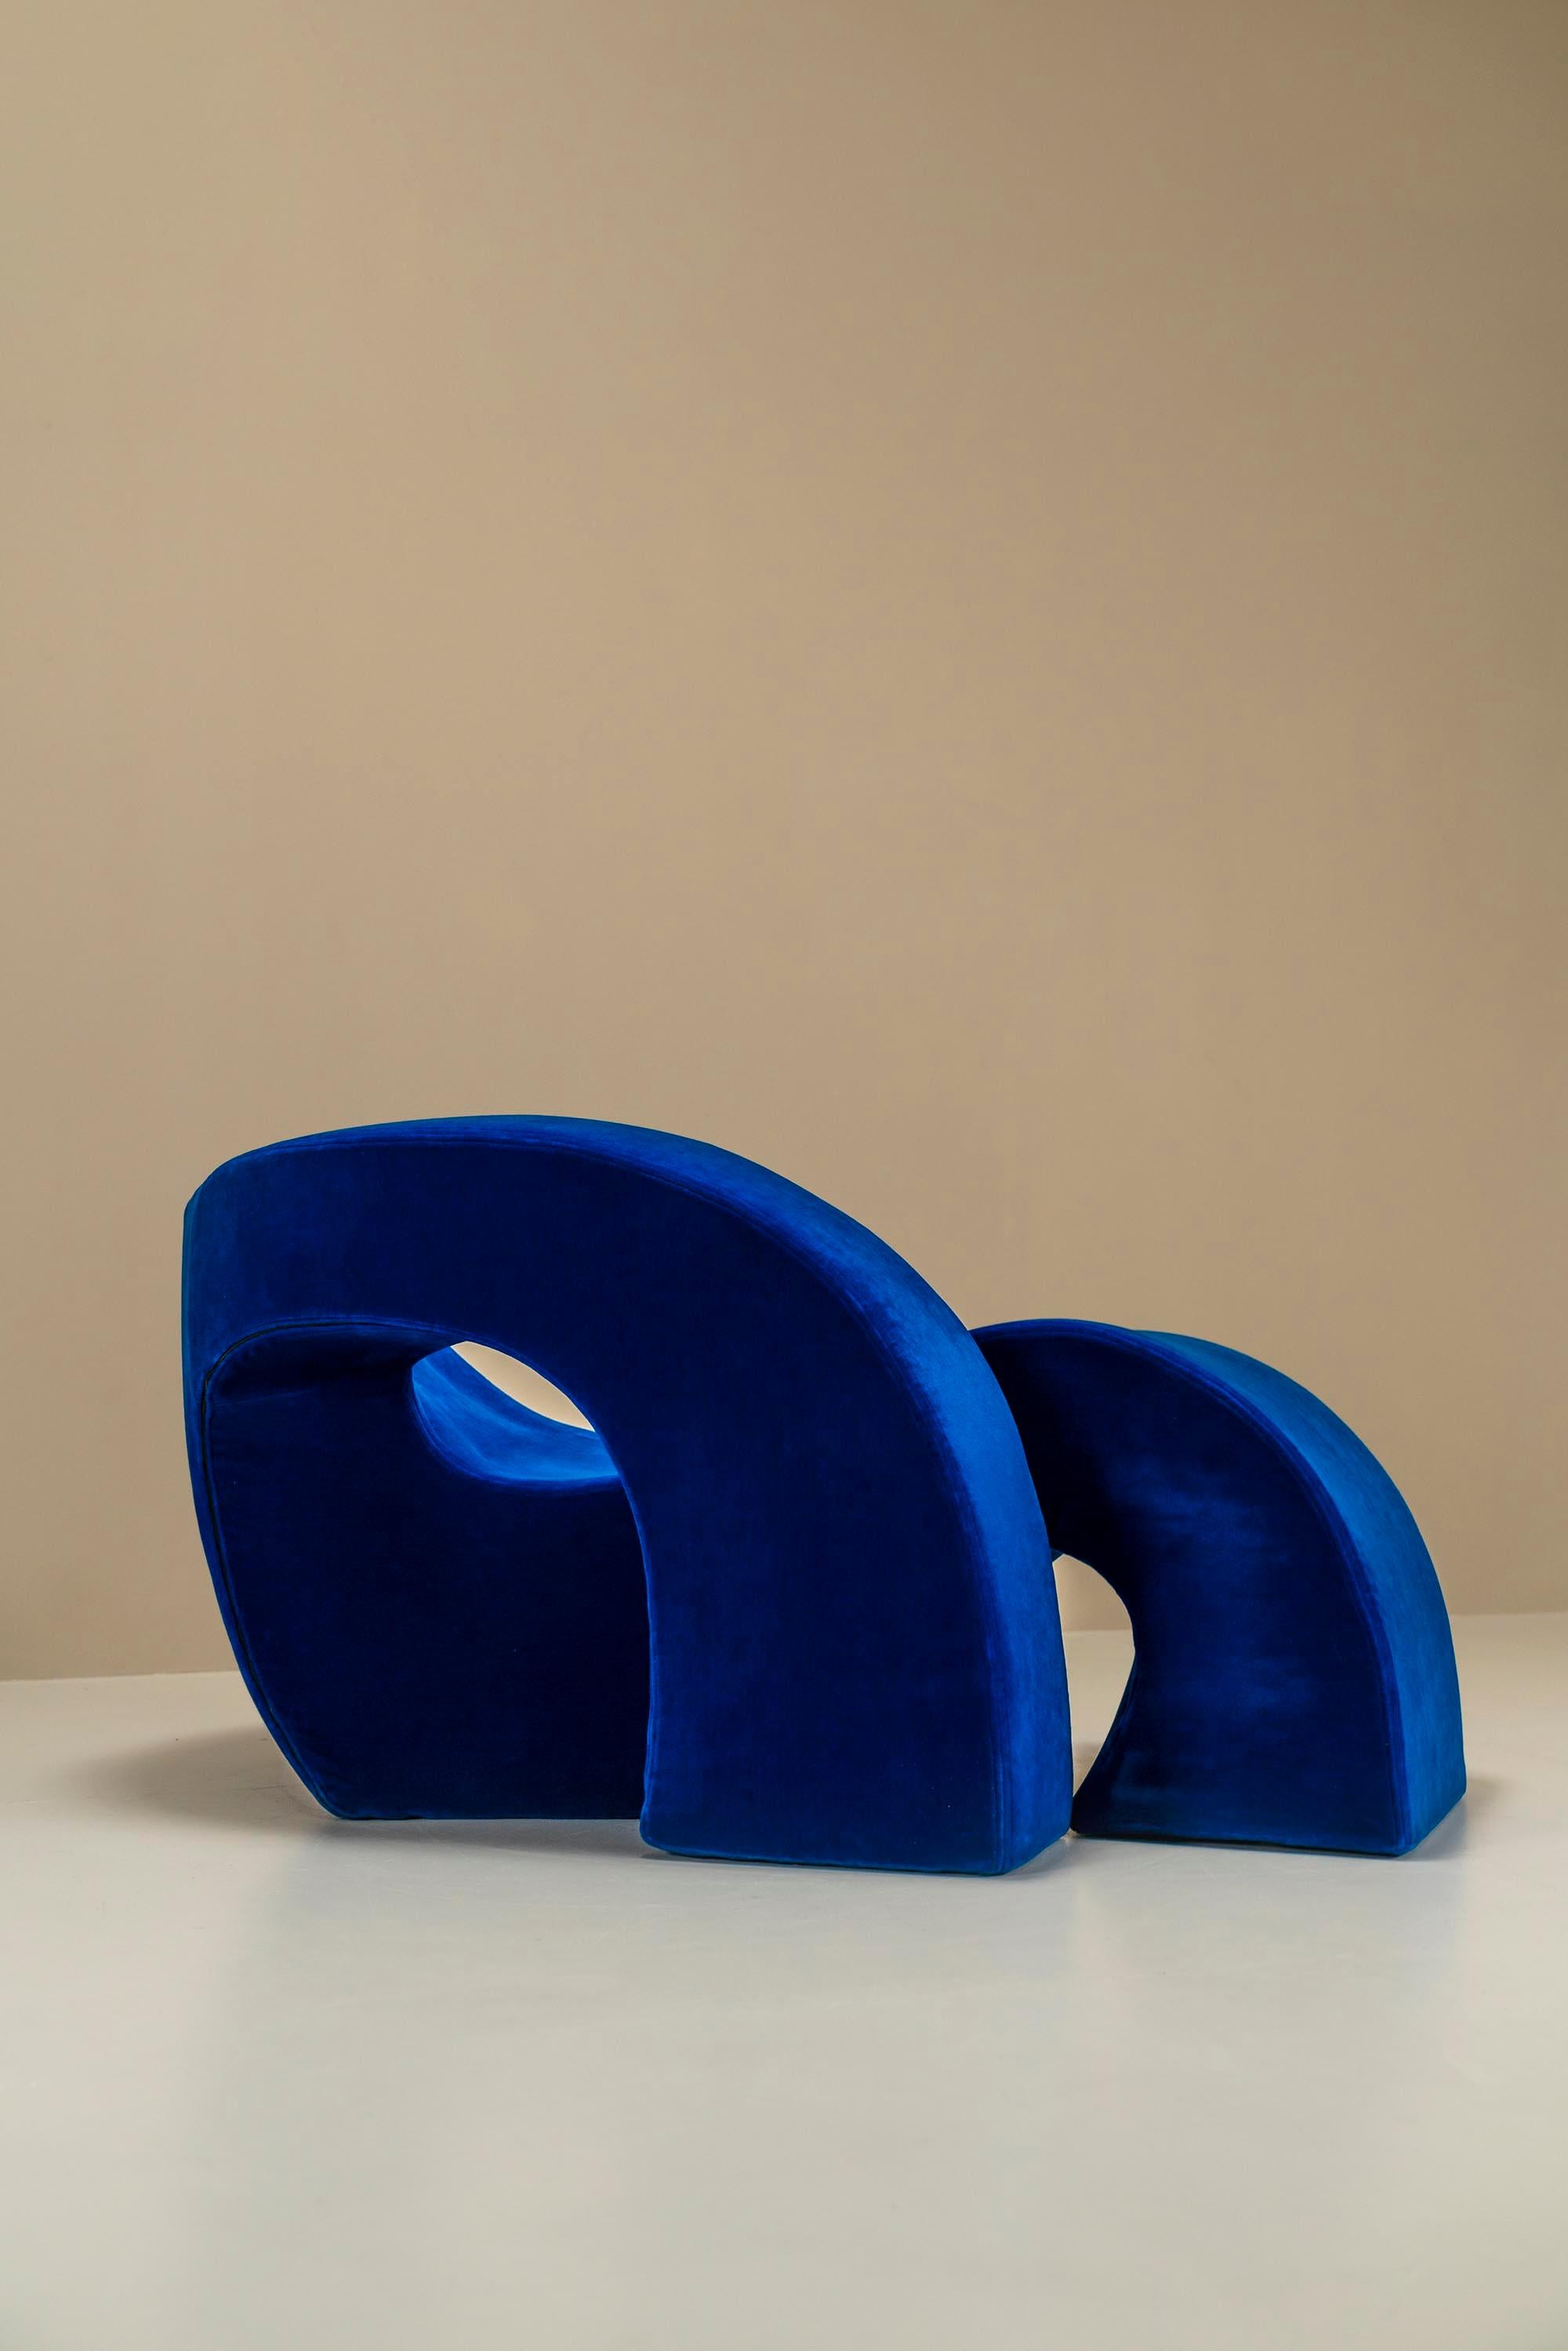 Sculptural Lounge Chair Model “Sess” by Nani Prina for Sormani, Italy 1960s For Sale 3